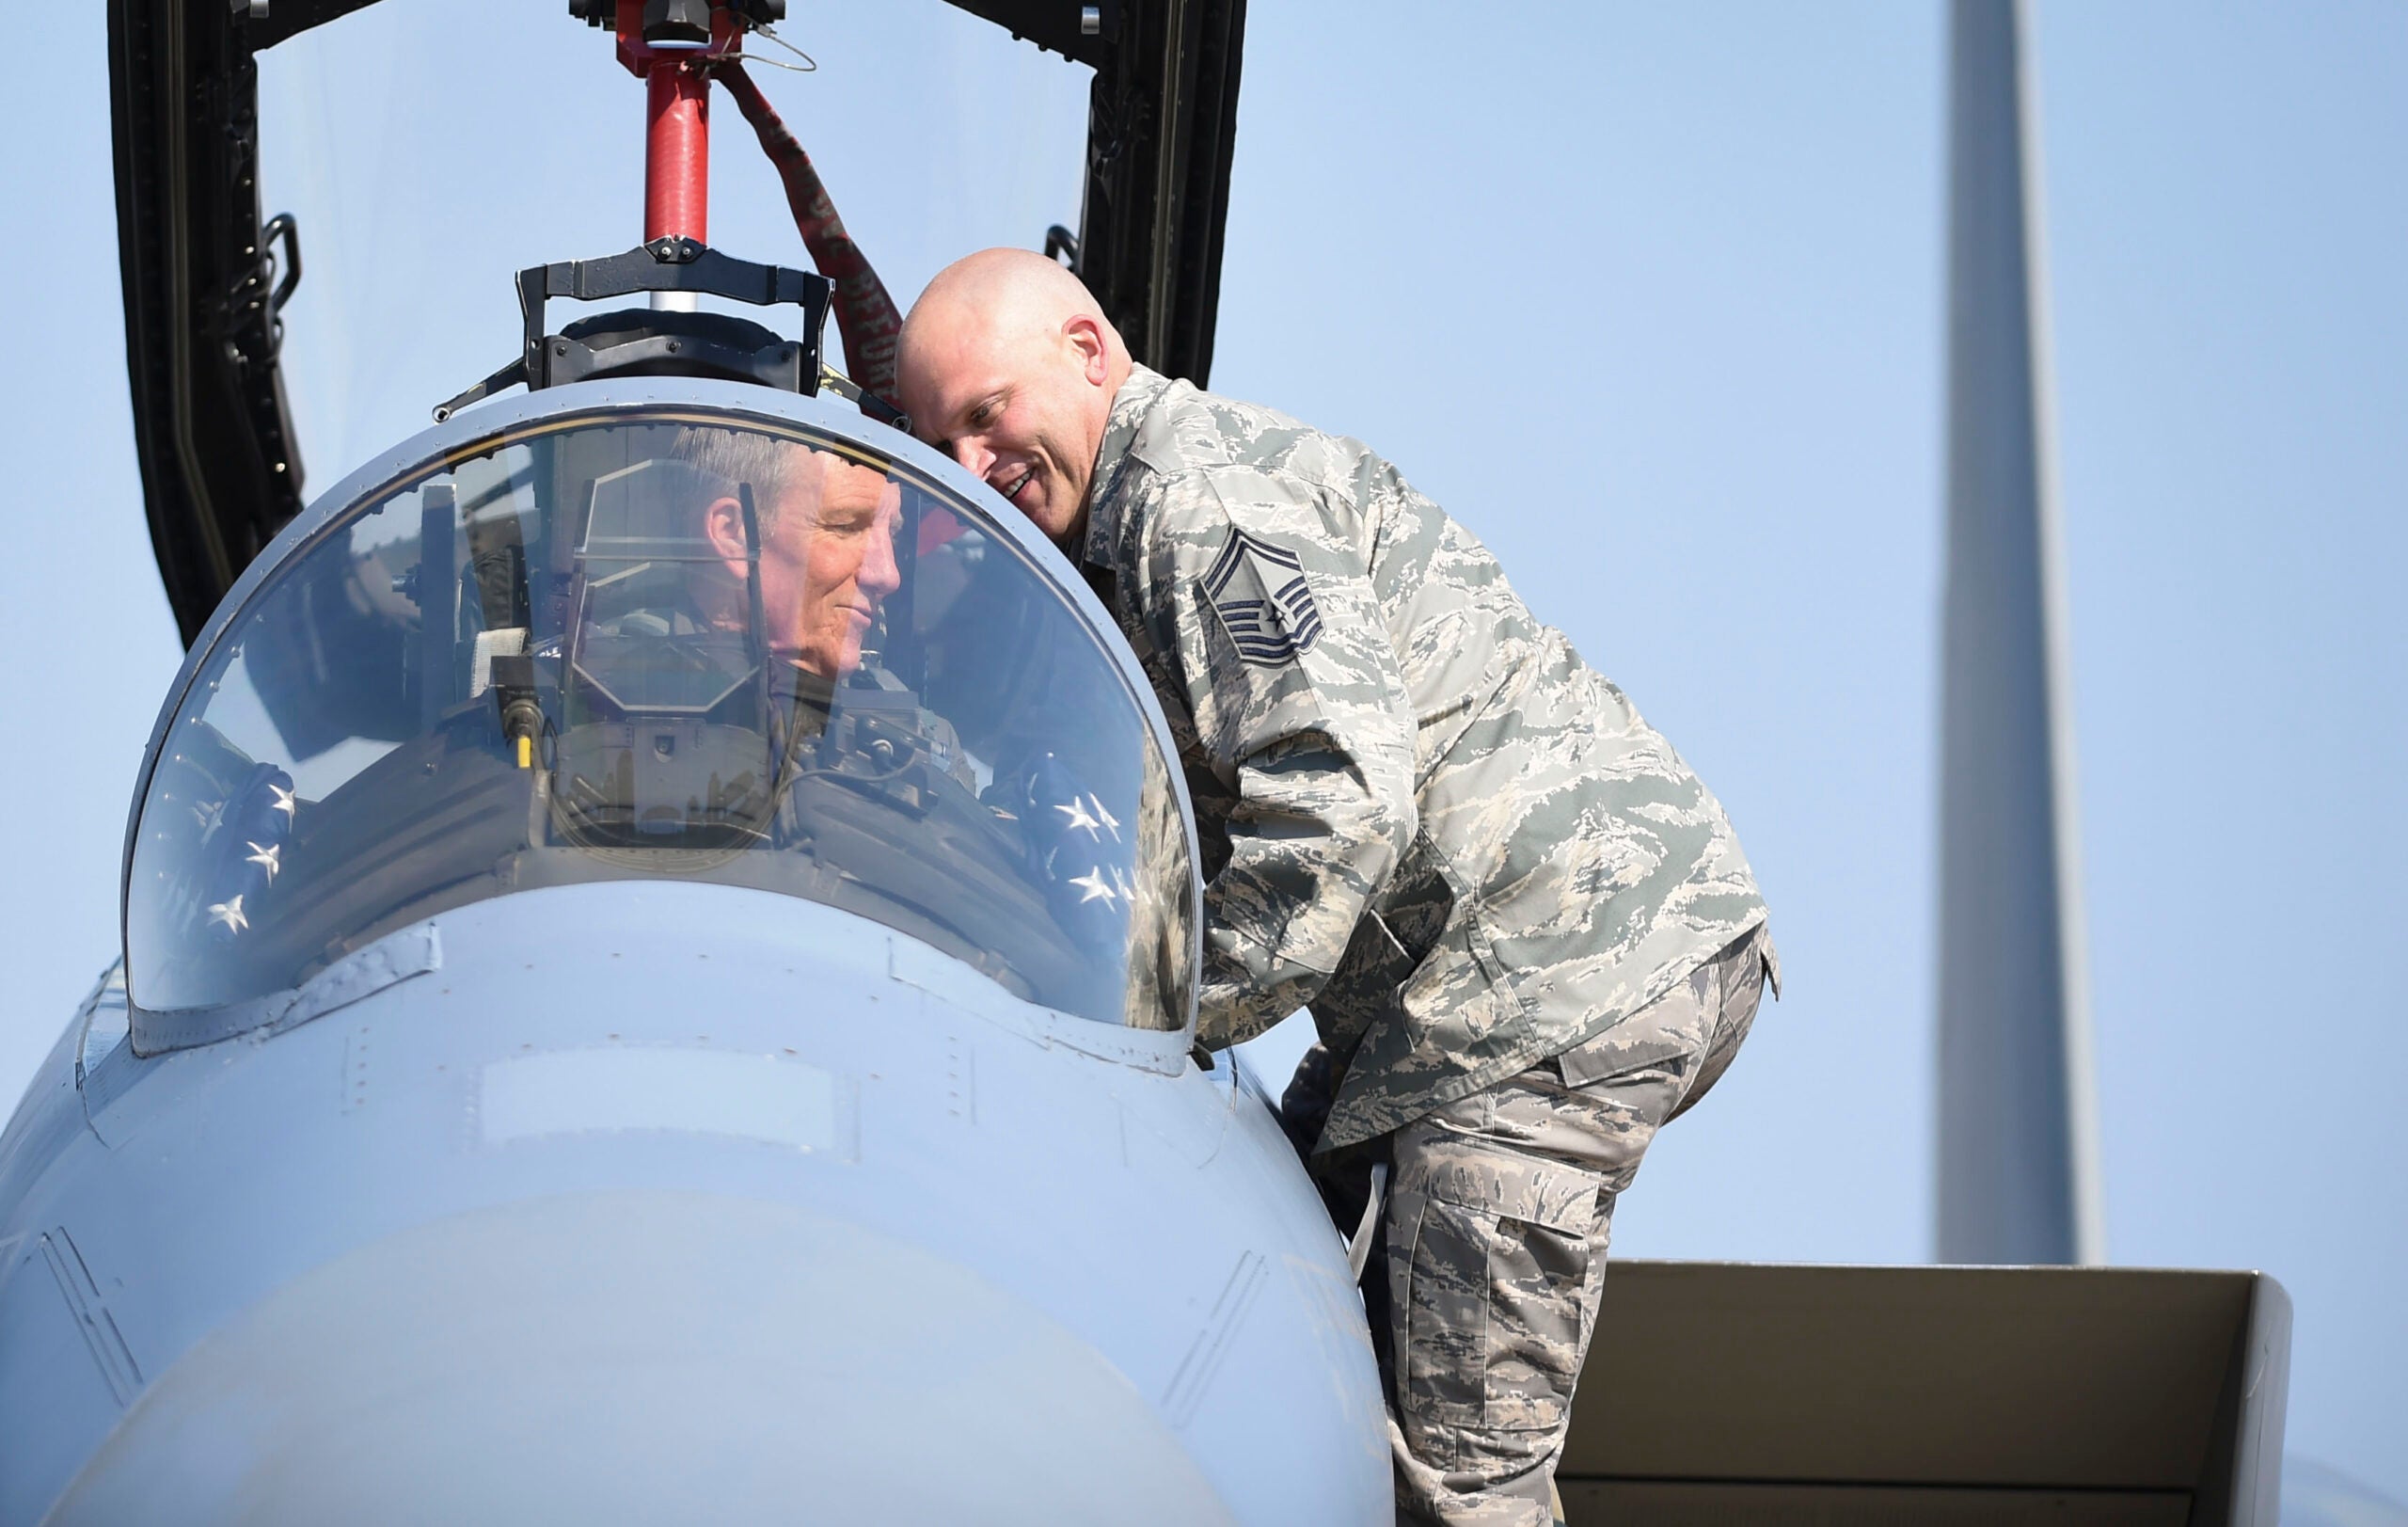 U.S. Air Force Gen. Herbert “Hawk” Carlisle, commander of Air Combat Command, goes over a preflight maintenance check with U.S. Air Force Senior Master Sgt. Jeffrey Zimmerman, 78th Aircraft Maintenance Unit superintendent, prior to his final flight at Joint Base Langley-Eustis, Va., March 9, 2017. Zimmerman was Carlisle’s first crew chief and was invited to lead the general’s final launch. (U.S. Air Force photo/Staff Sgt. Natasha Stannard)